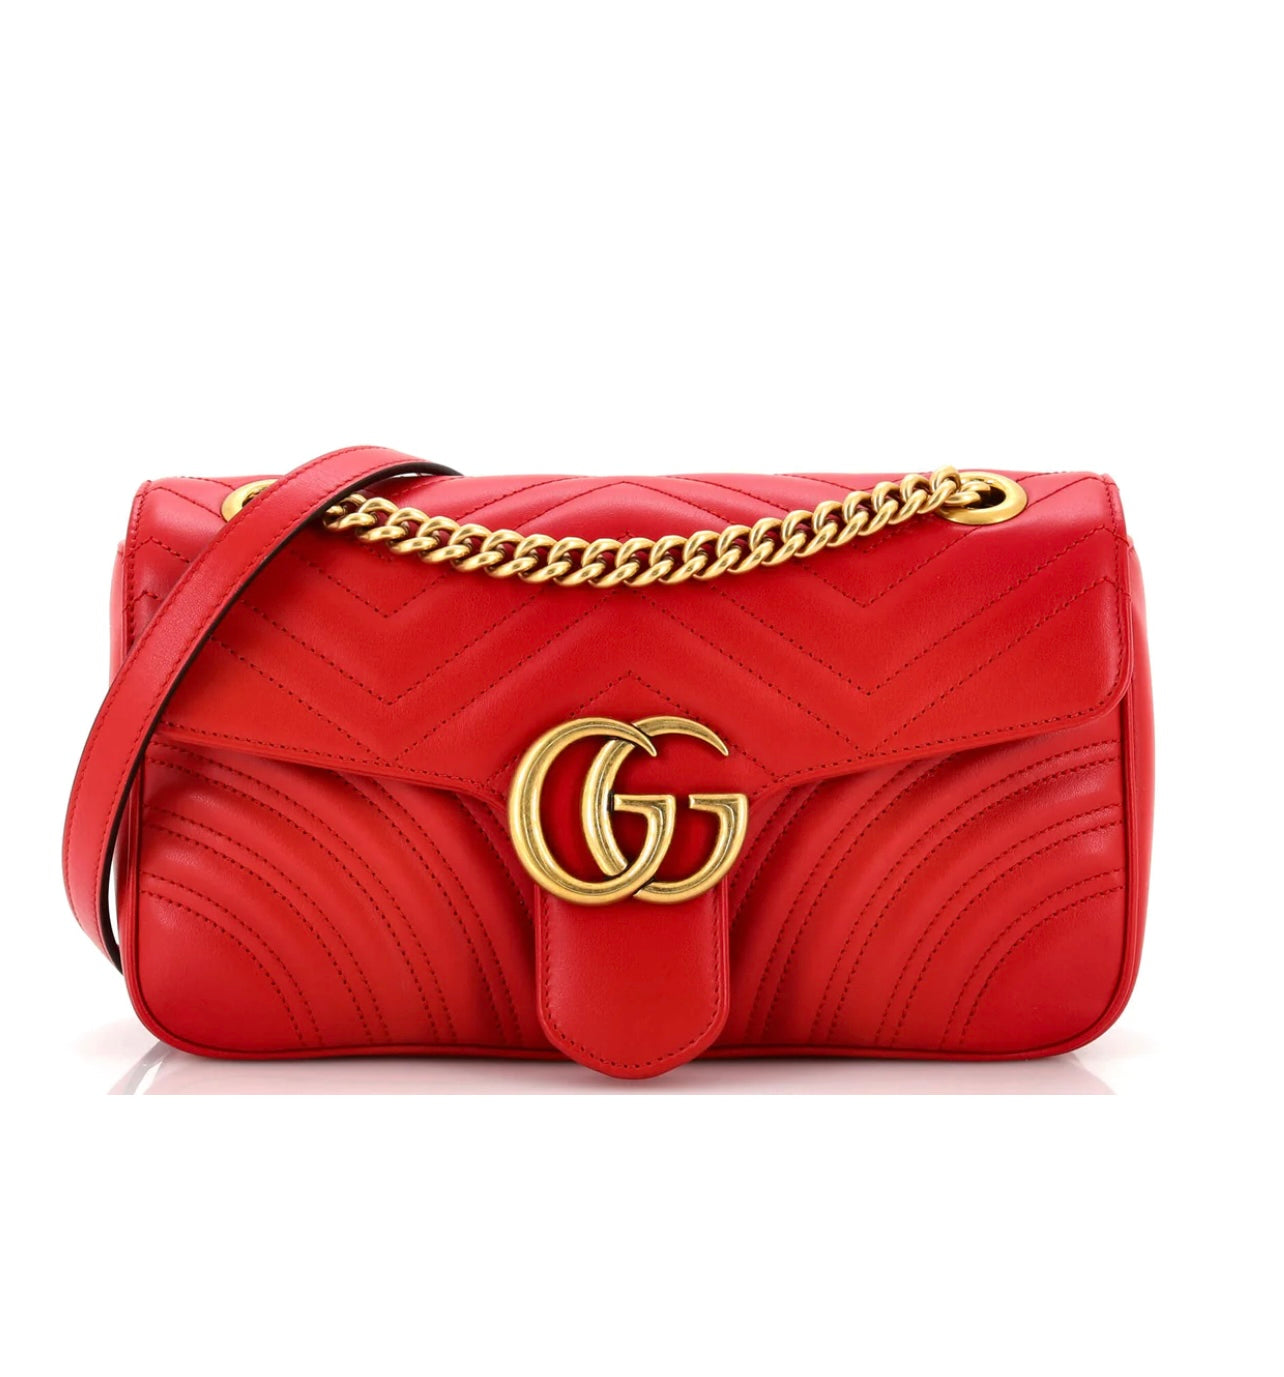 GUCCI - GG RED Marmont Flap Bag Matelasse Small